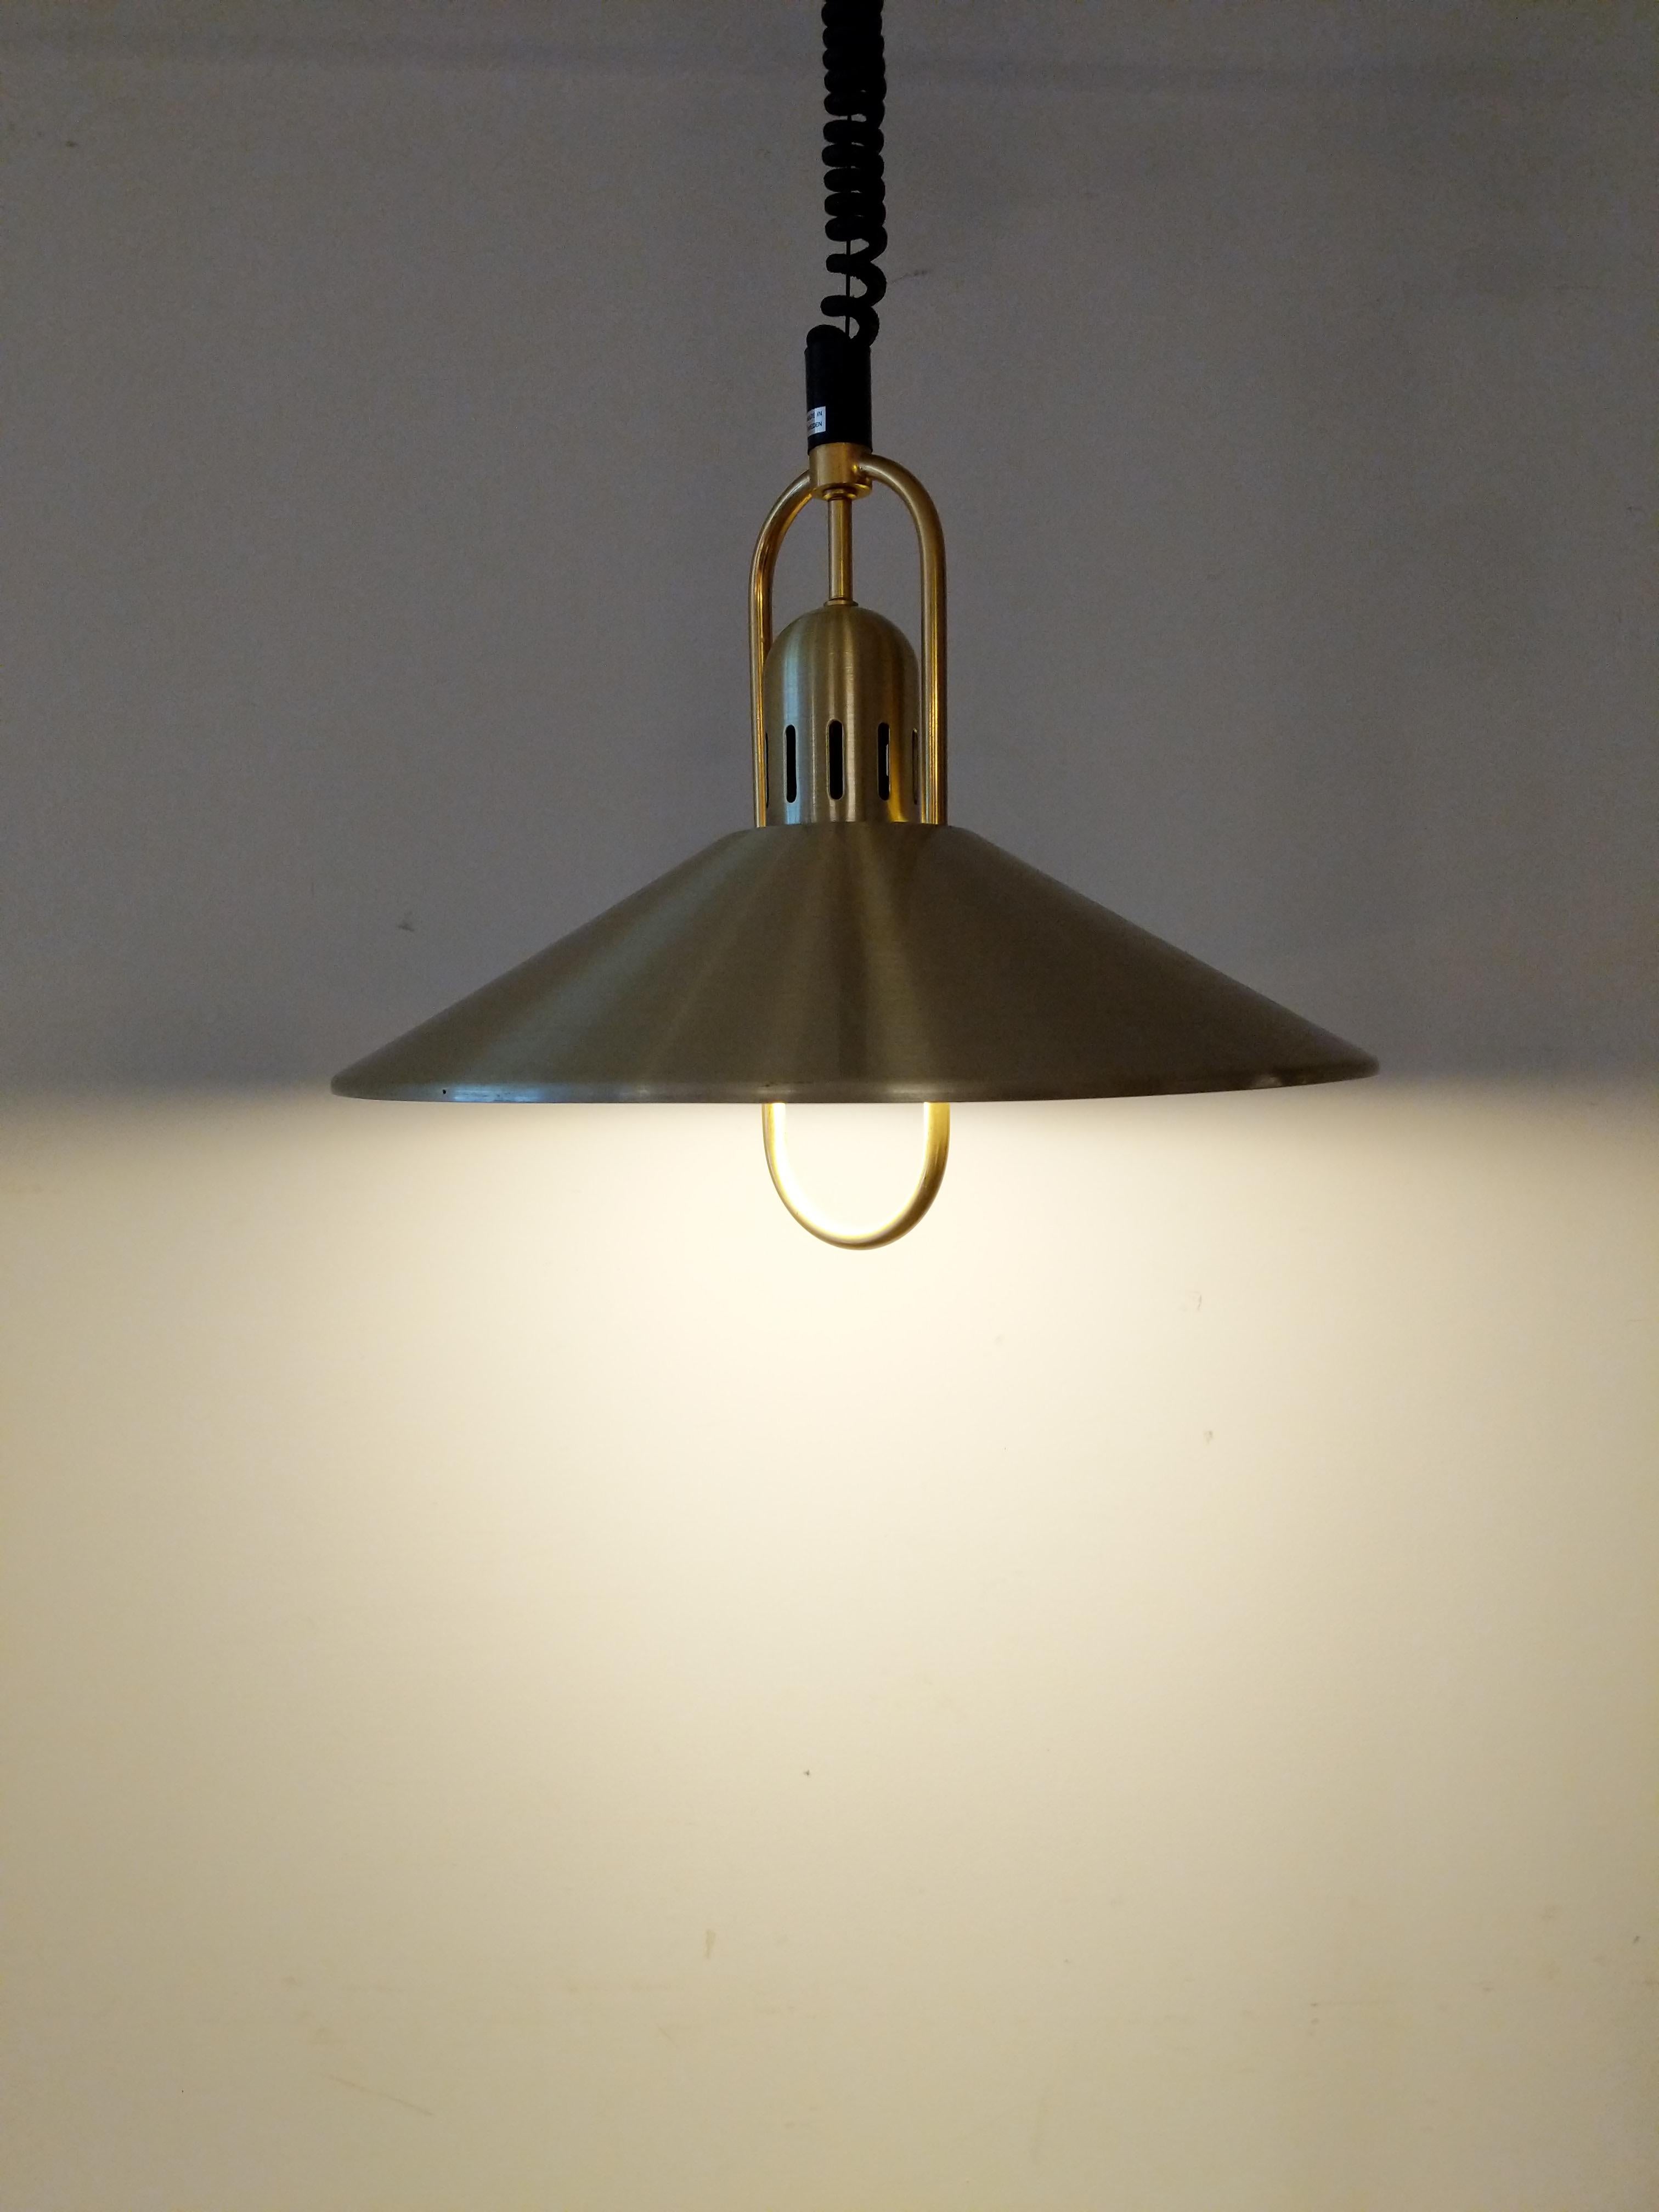 Vintage Swedish Modern Lamp by Belid In Good Condition For Sale In Gardiner, NY